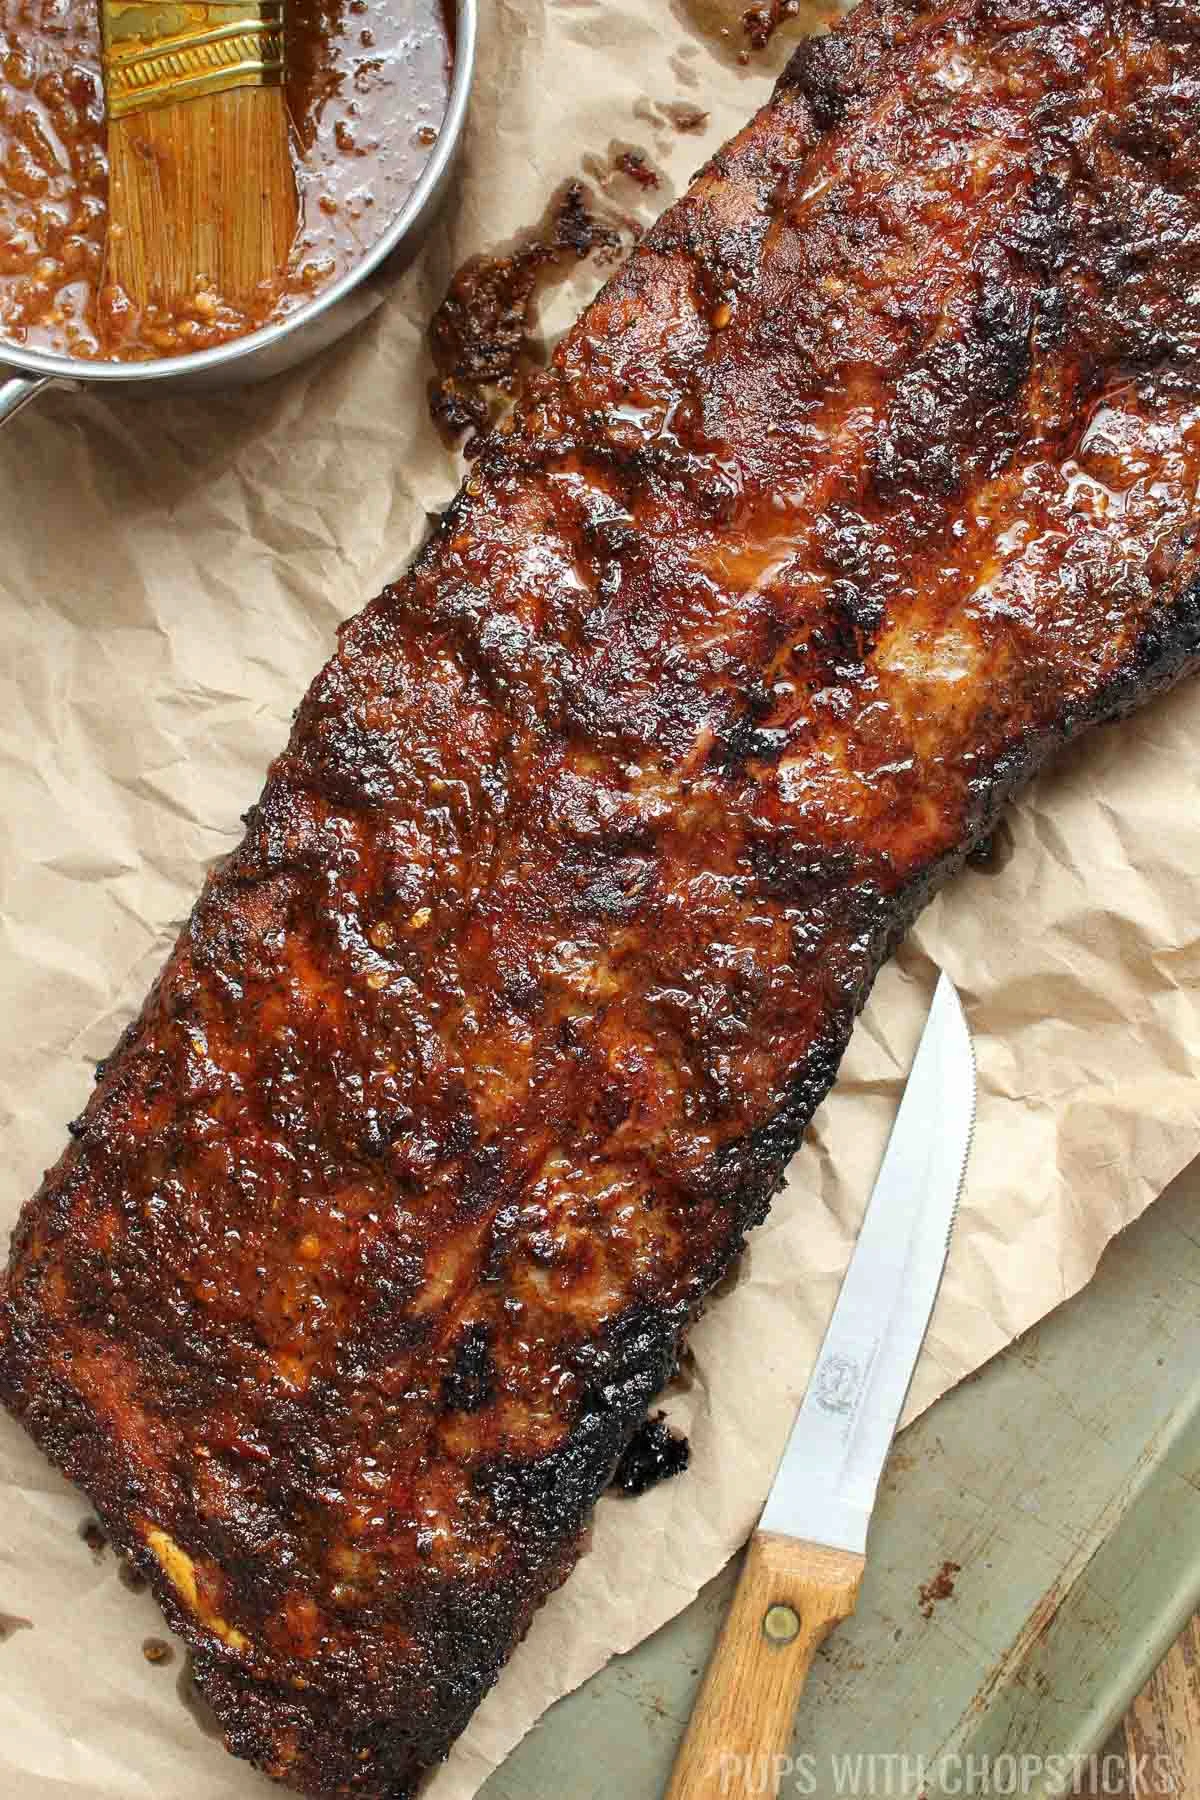 A slab of coca cola ribs on parchment.